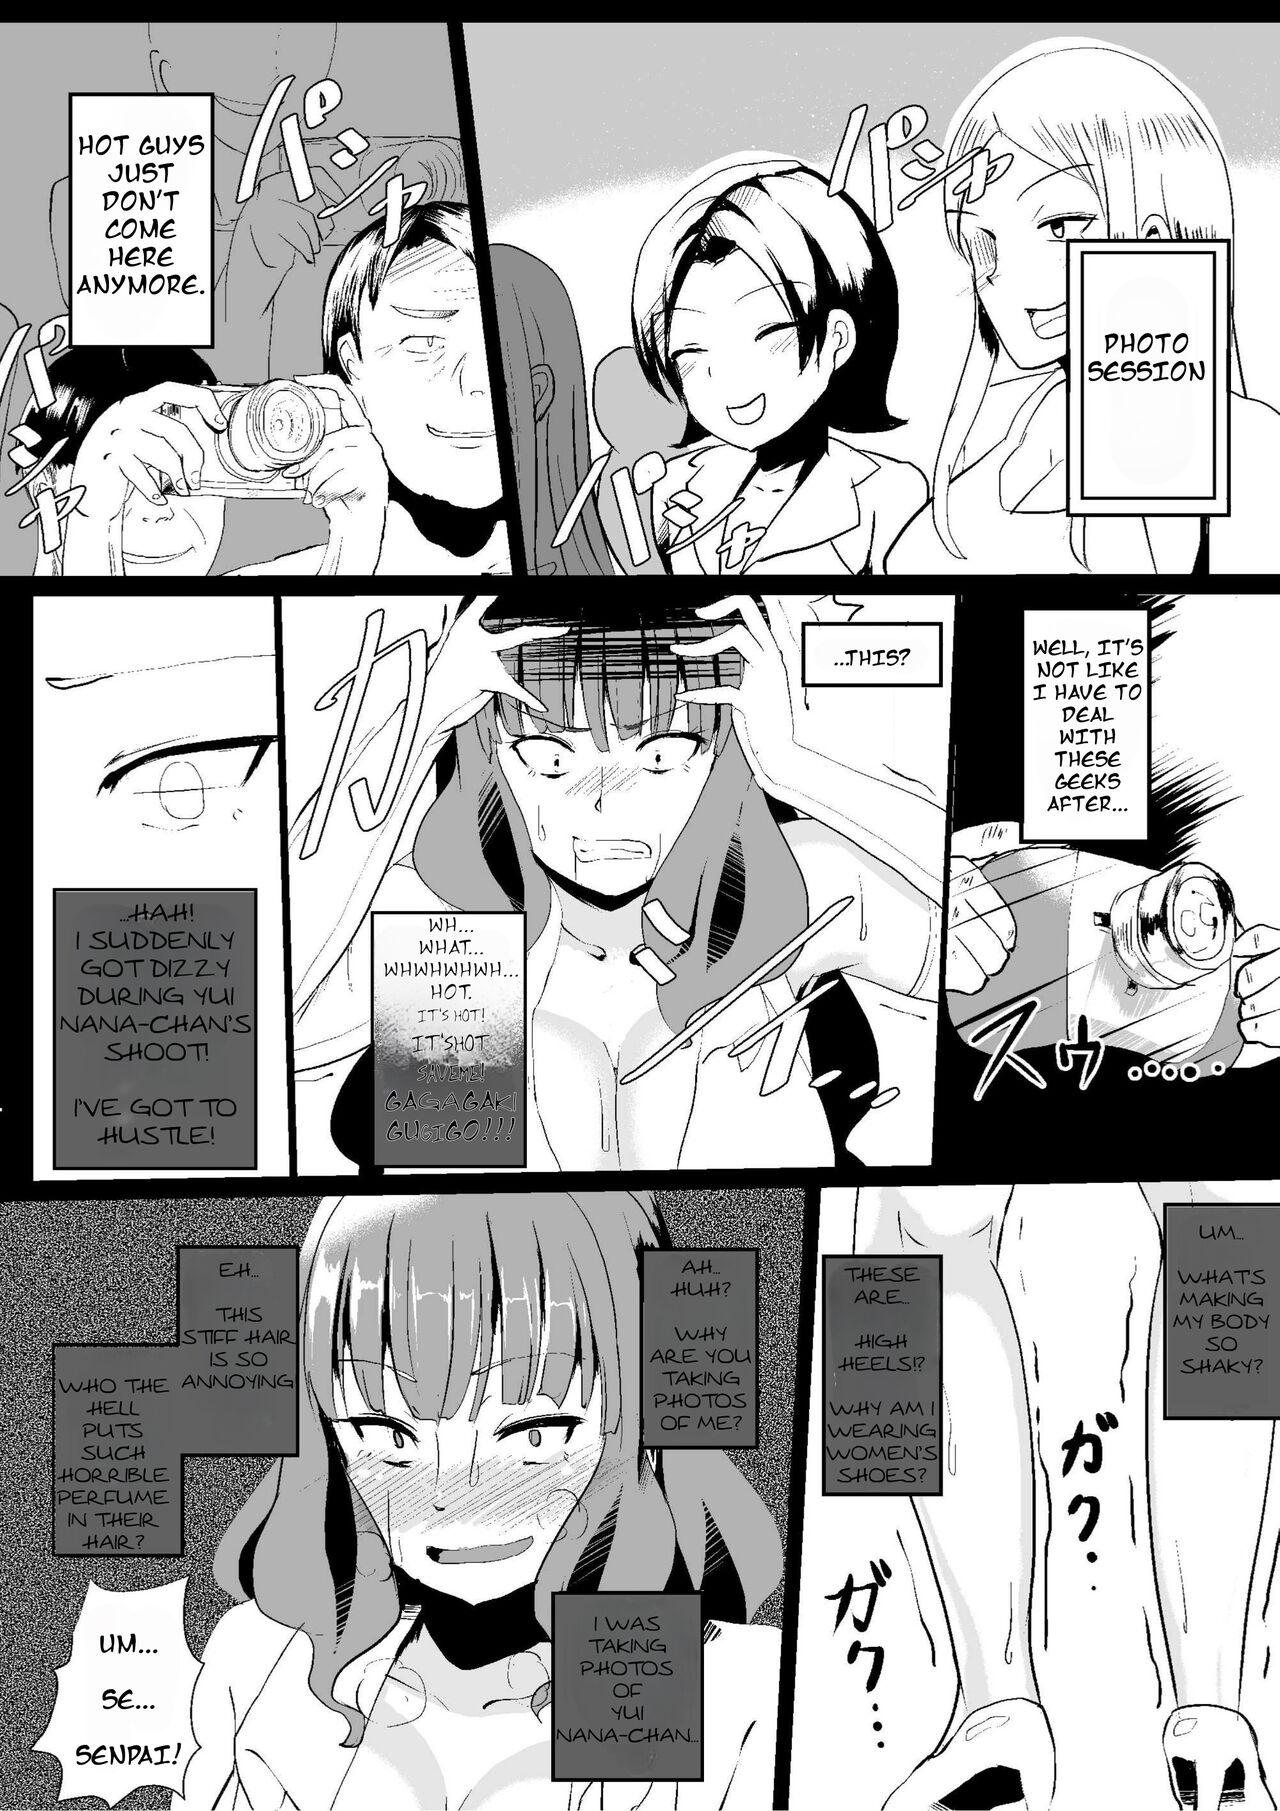 Awesome Onna no Kokoro o Ossanka Suru Camera | Changing a Woman's Heart to an Old Man's With a Camera - Original Hot Wife - Page 5